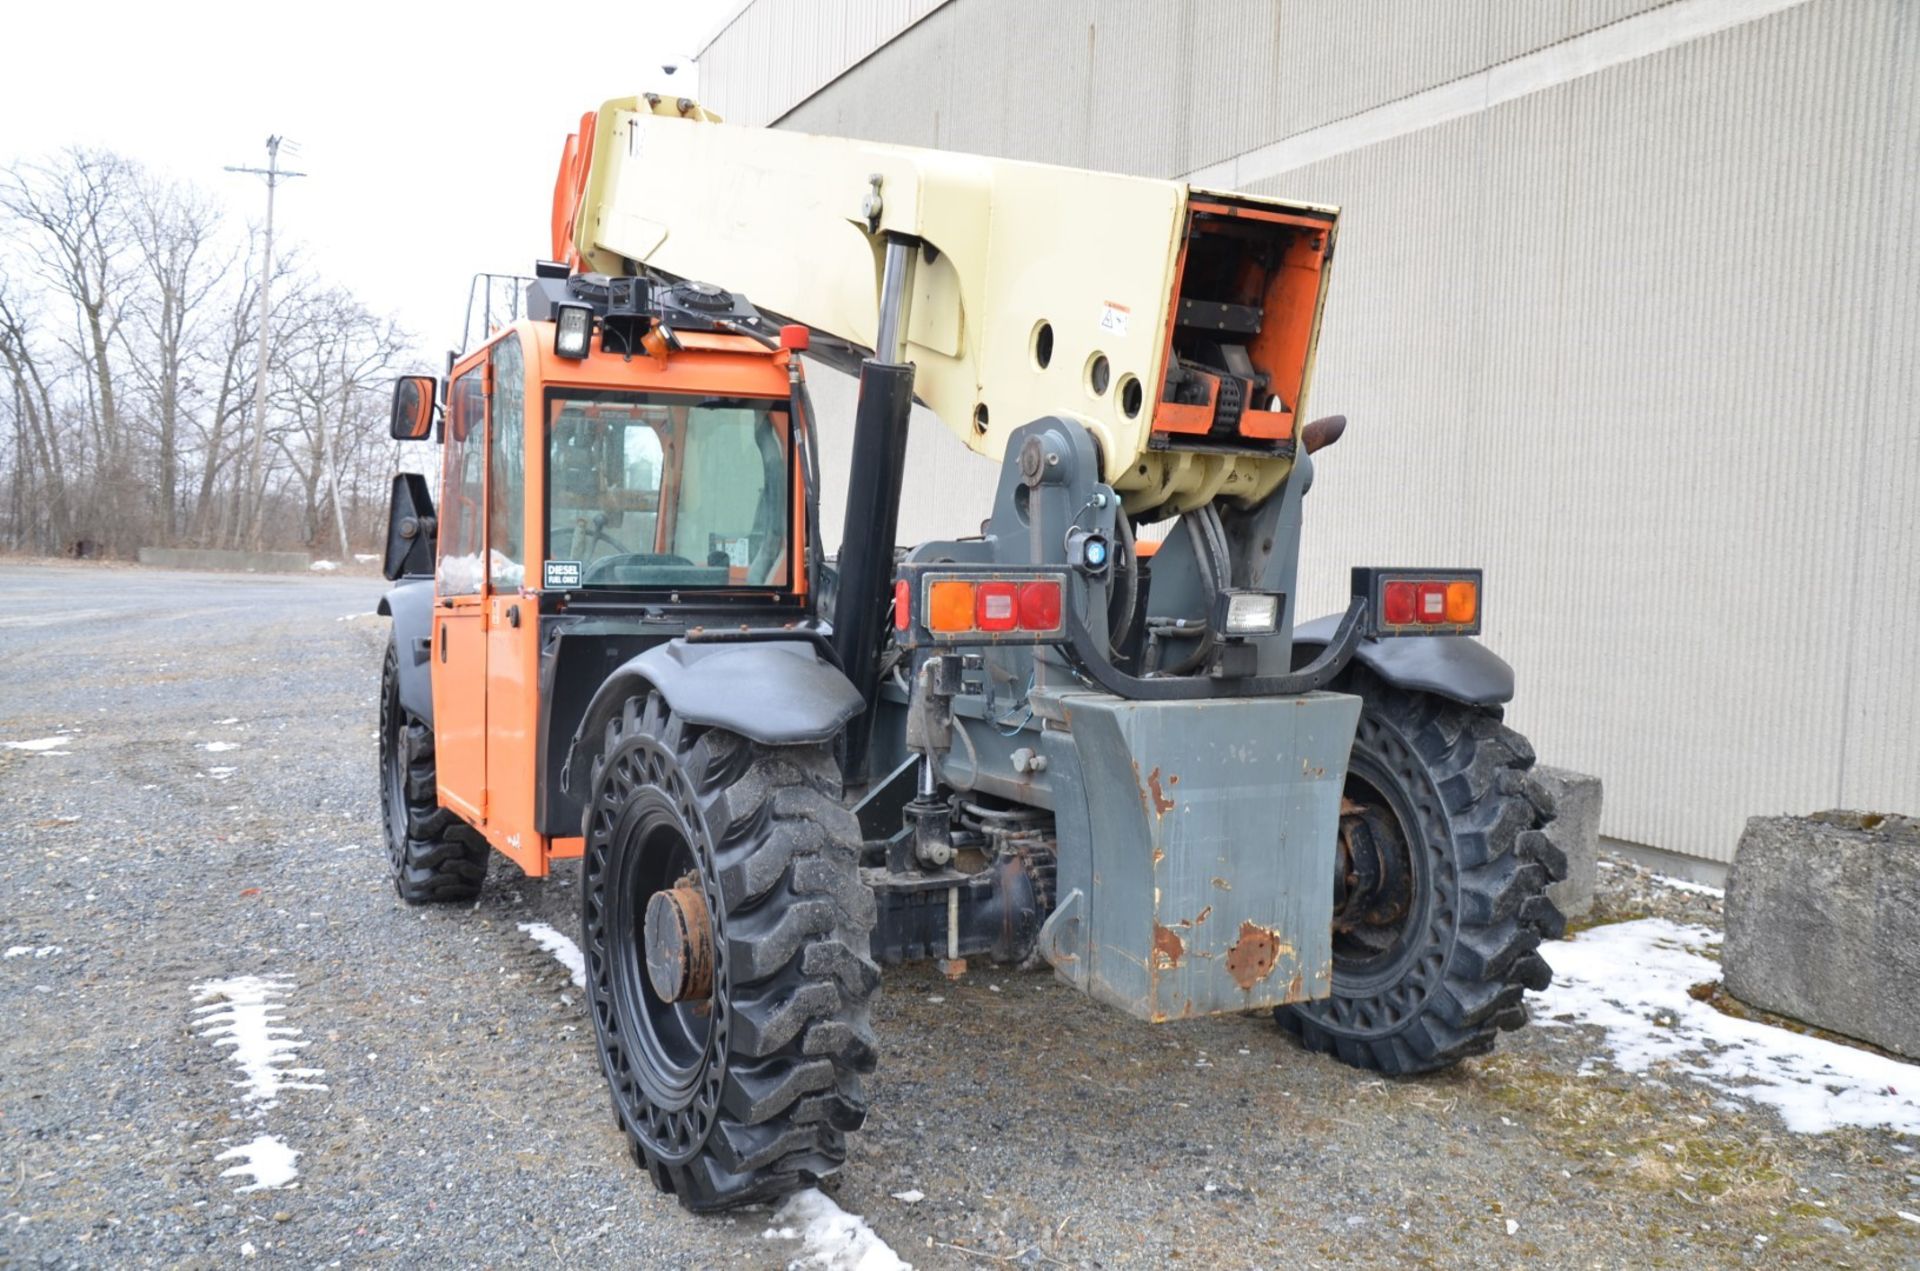 JLG (2011) G10-55A 10,000 LBS. CAPACITY DIESEL TELEHANDLER FORKLIFT WITH 56' MAX VERTICAL LIFT, - Image 11 of 23